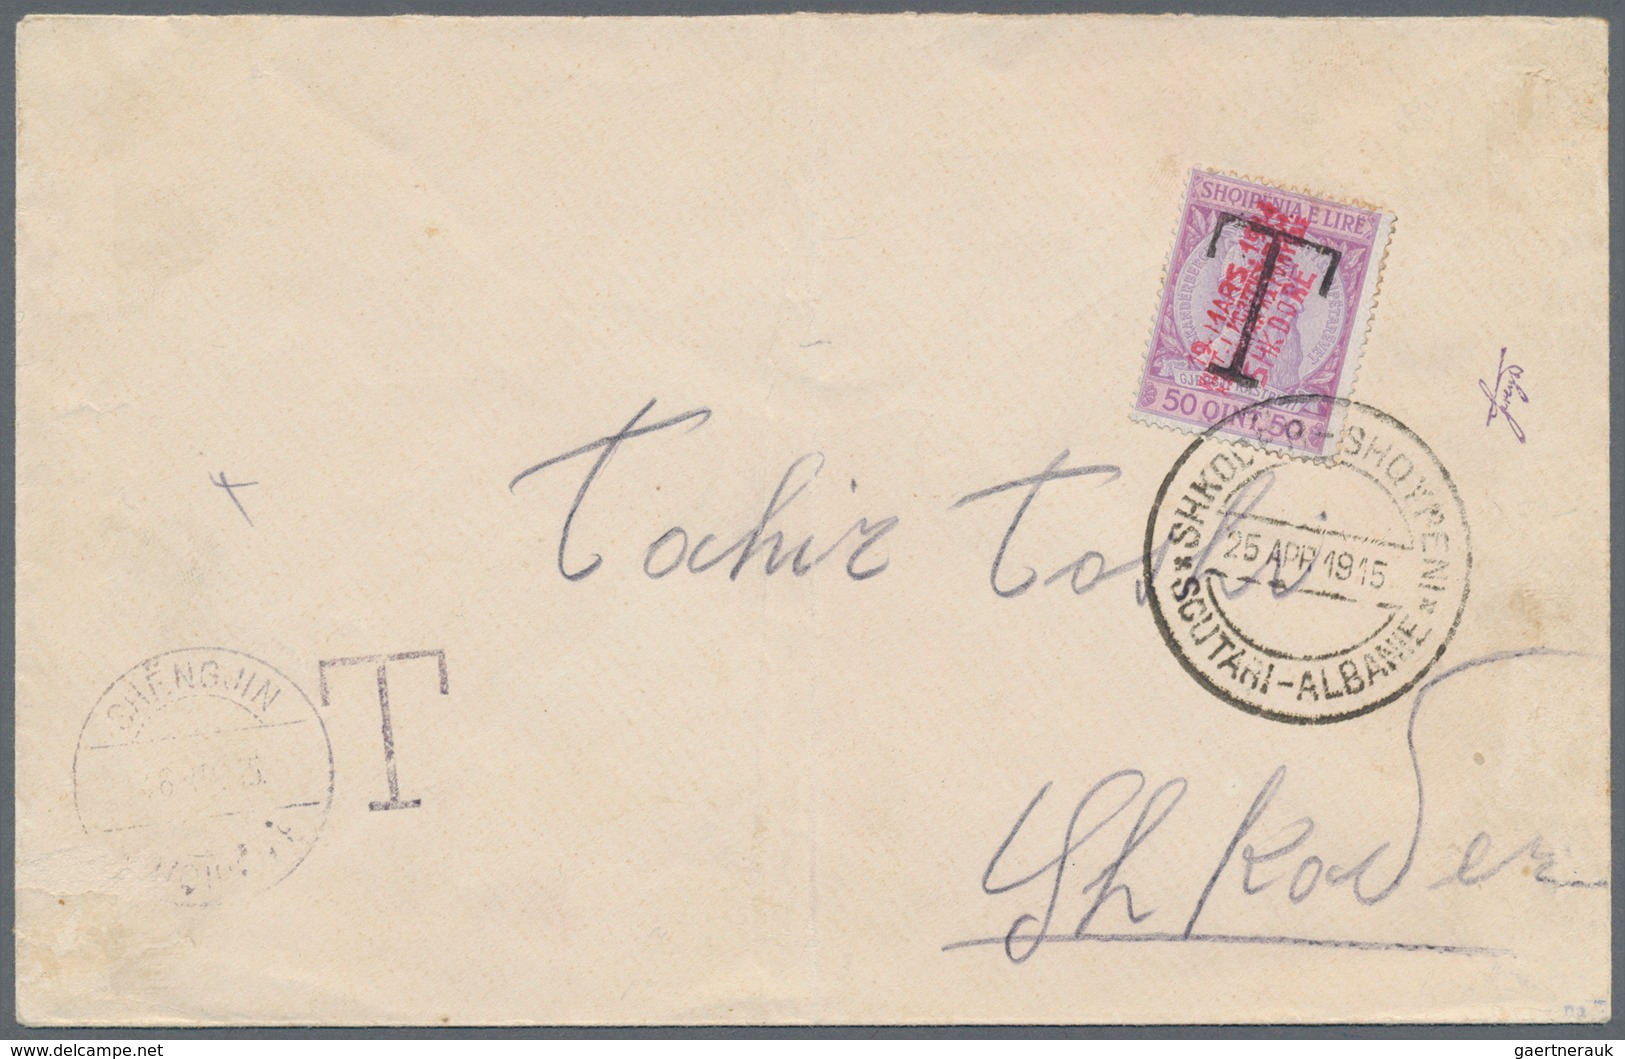 Albanien - Lokalausgaben: 1915. Cover To SCUTARI Despatched Stampless By "SHENGJIN 16.III.15", Hands - Albania